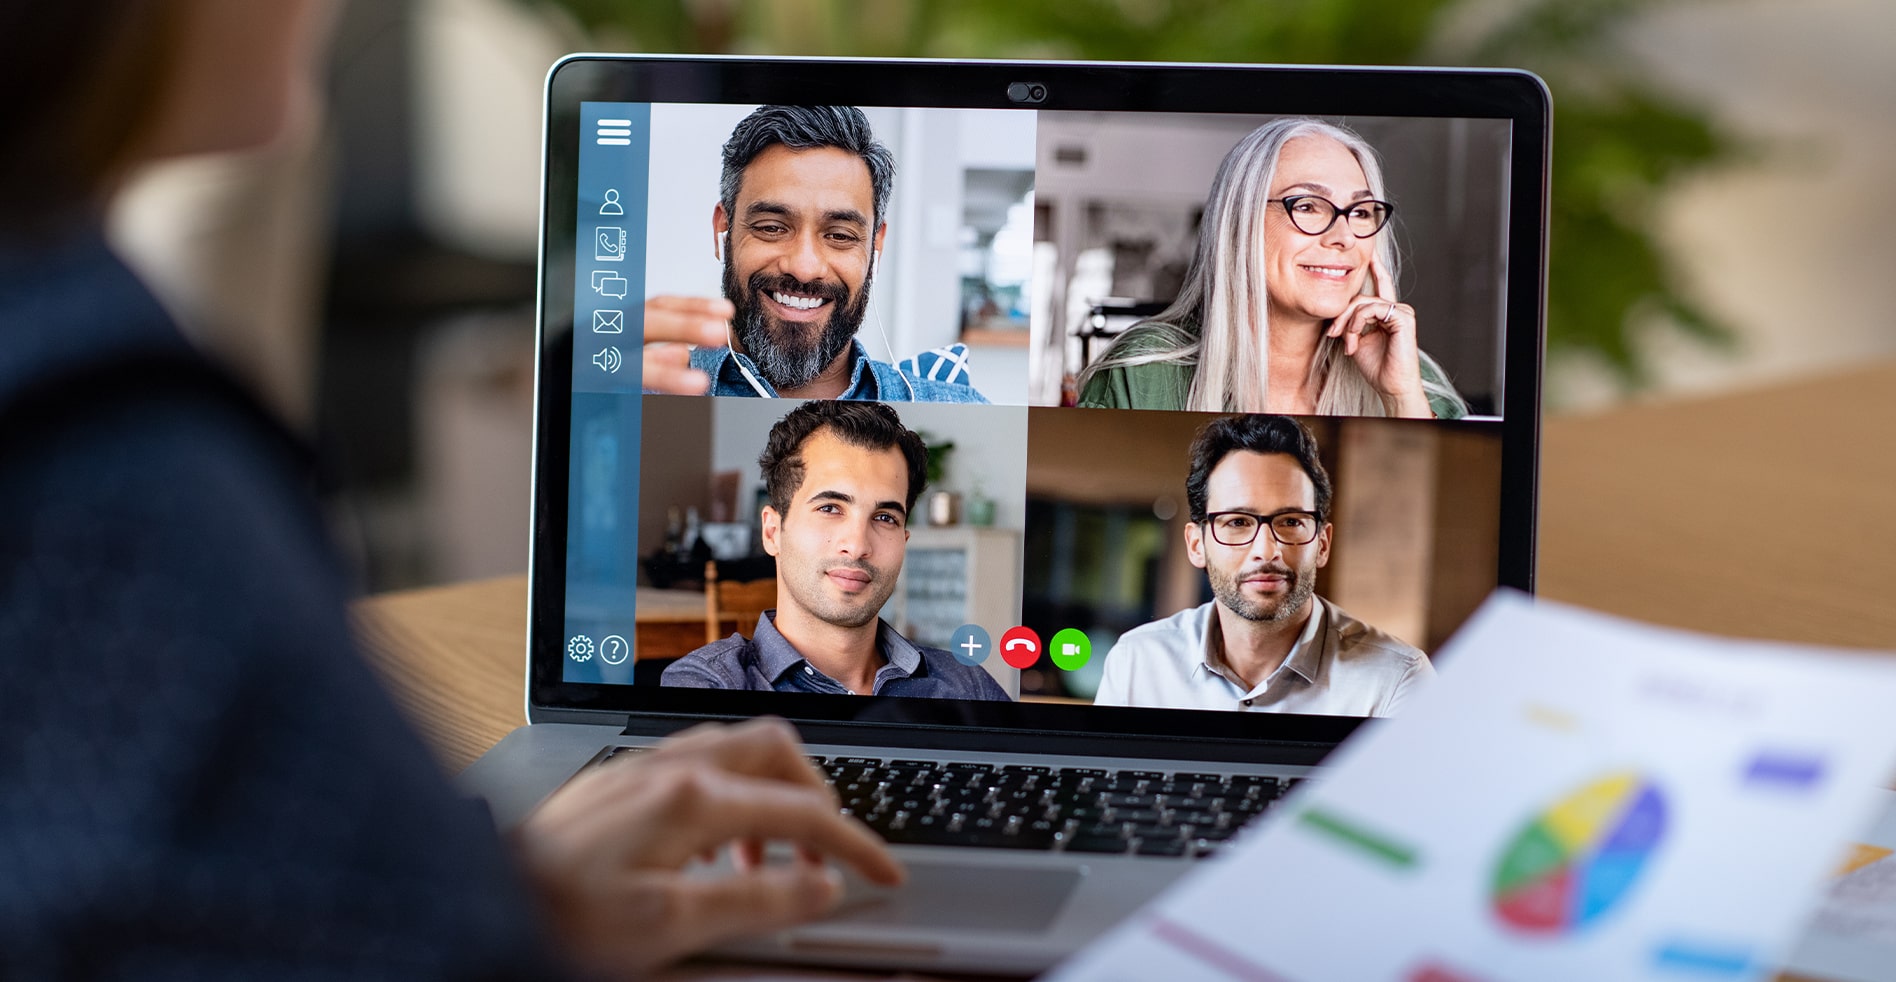 remote workers using secure video conferencing platform